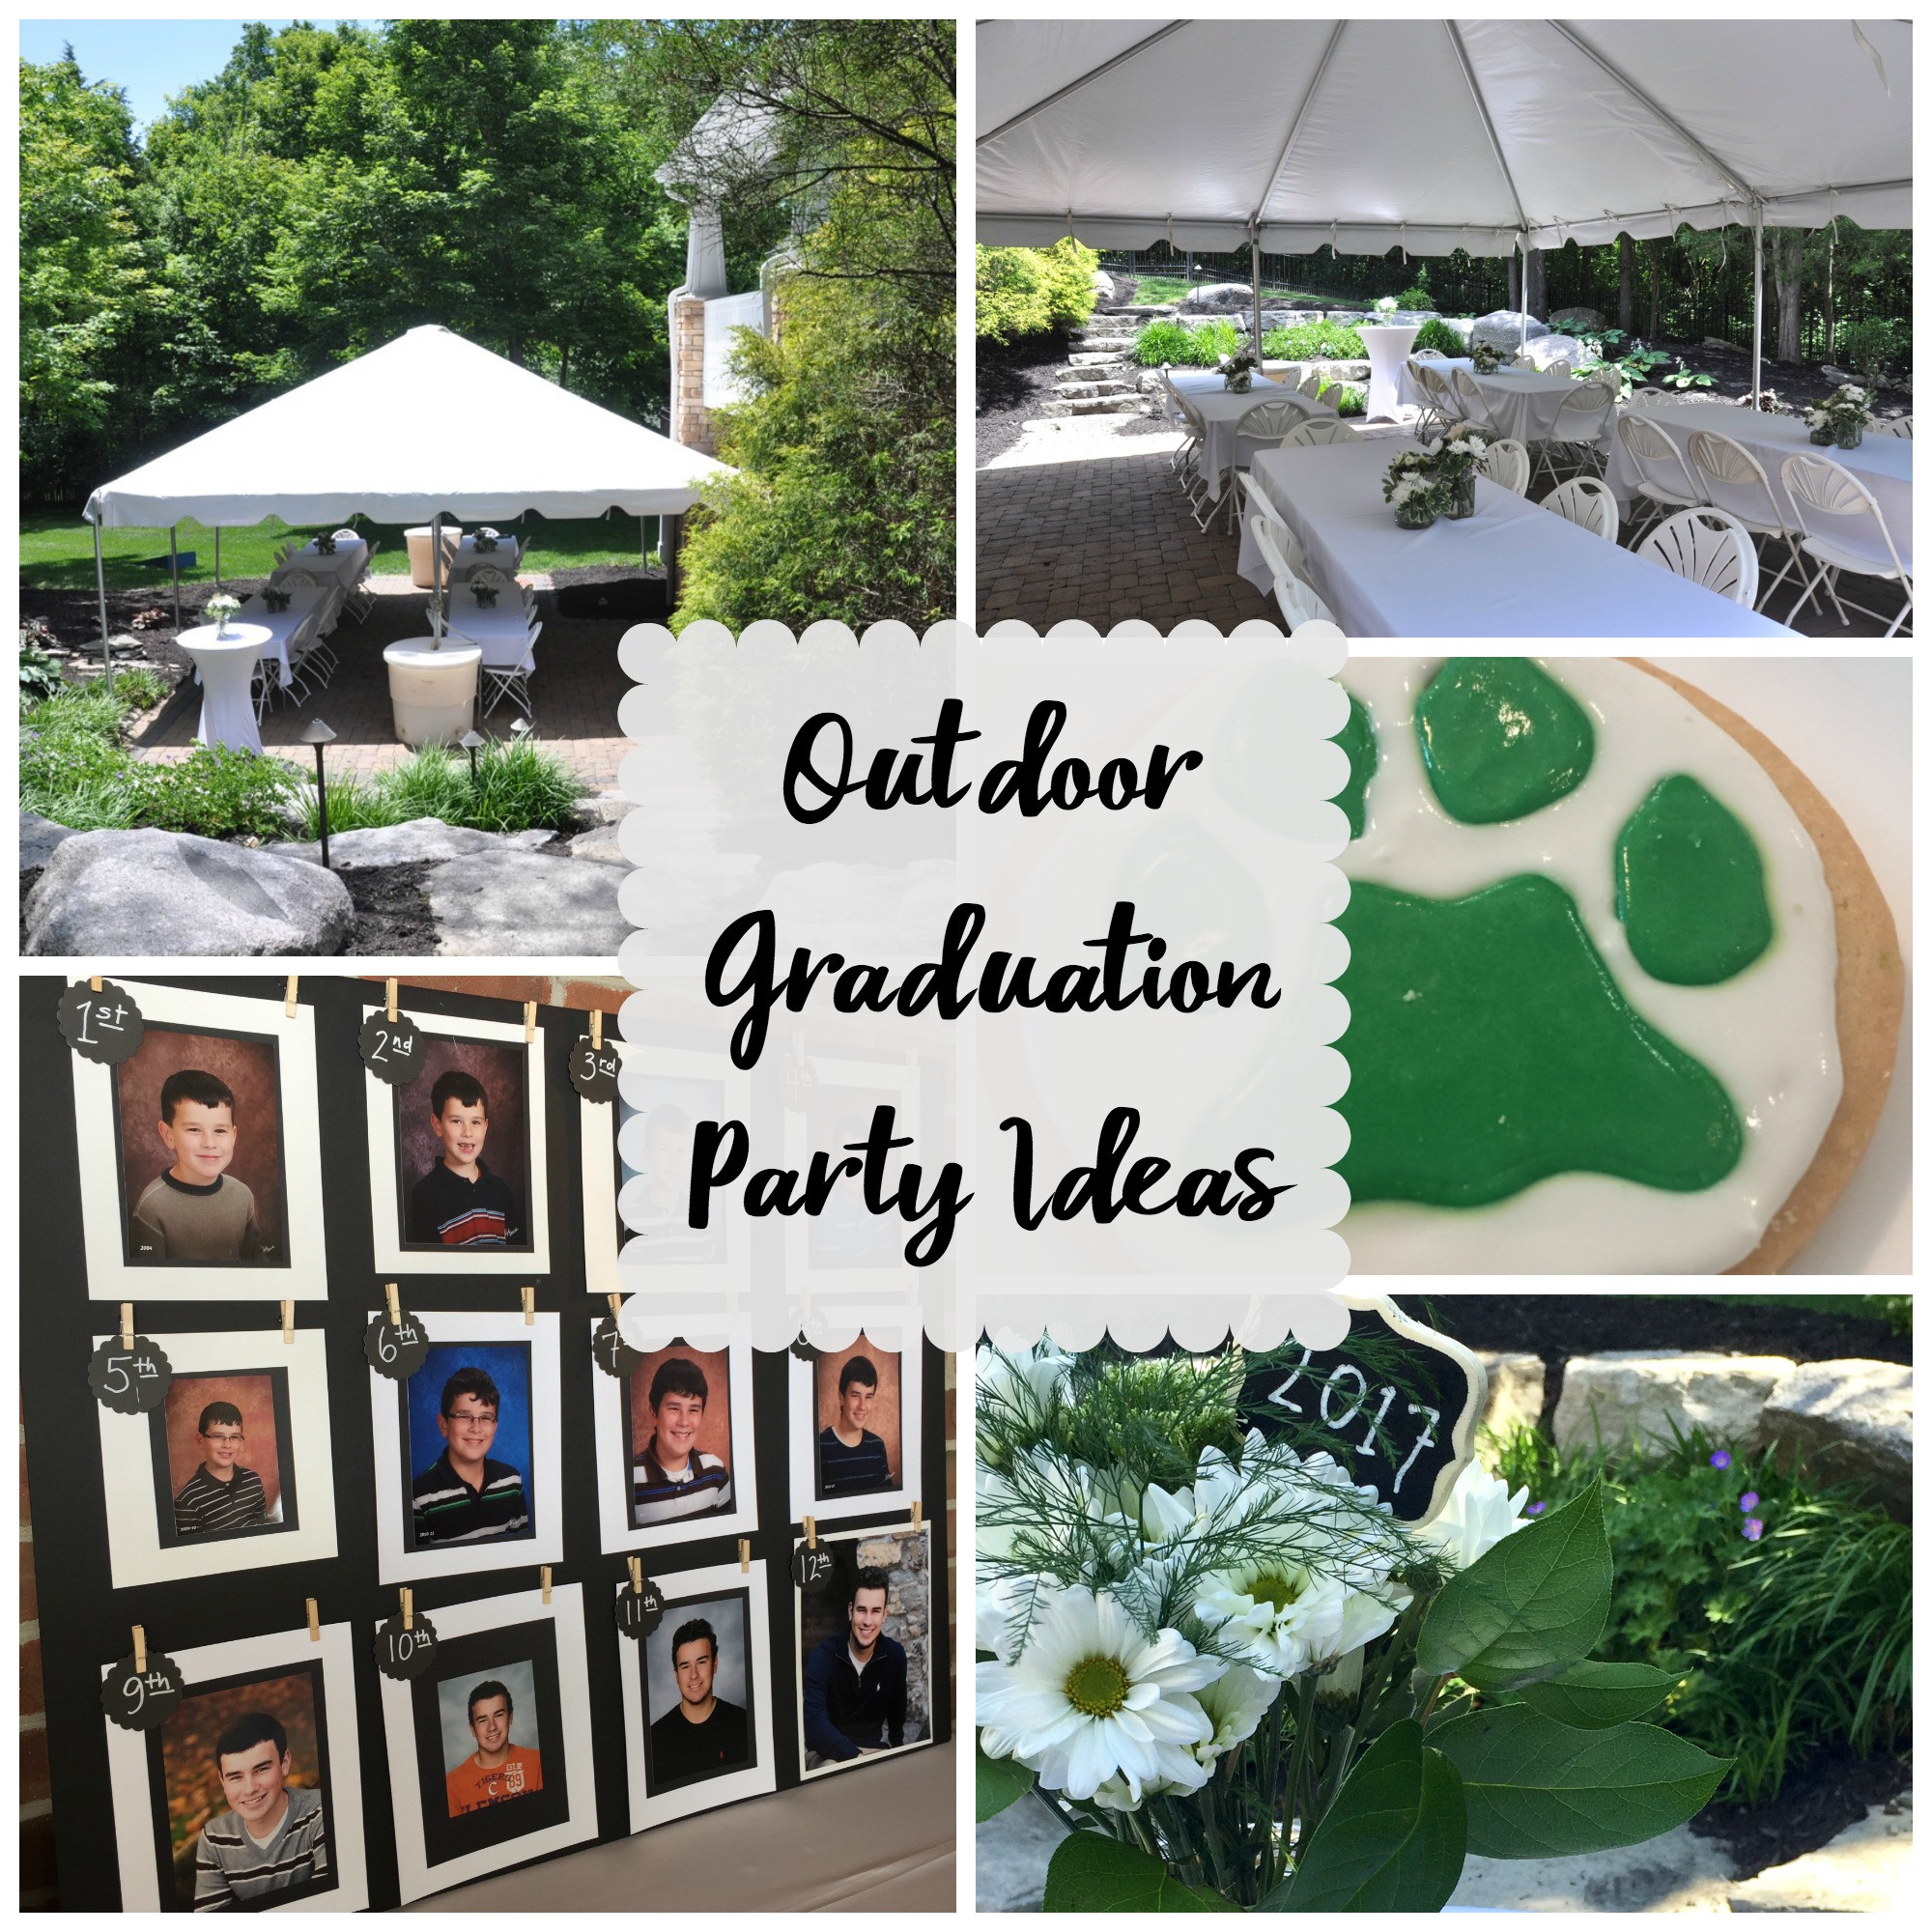 Graduation Party Ideas
 Outdoor Graduation Party Evolution of Style